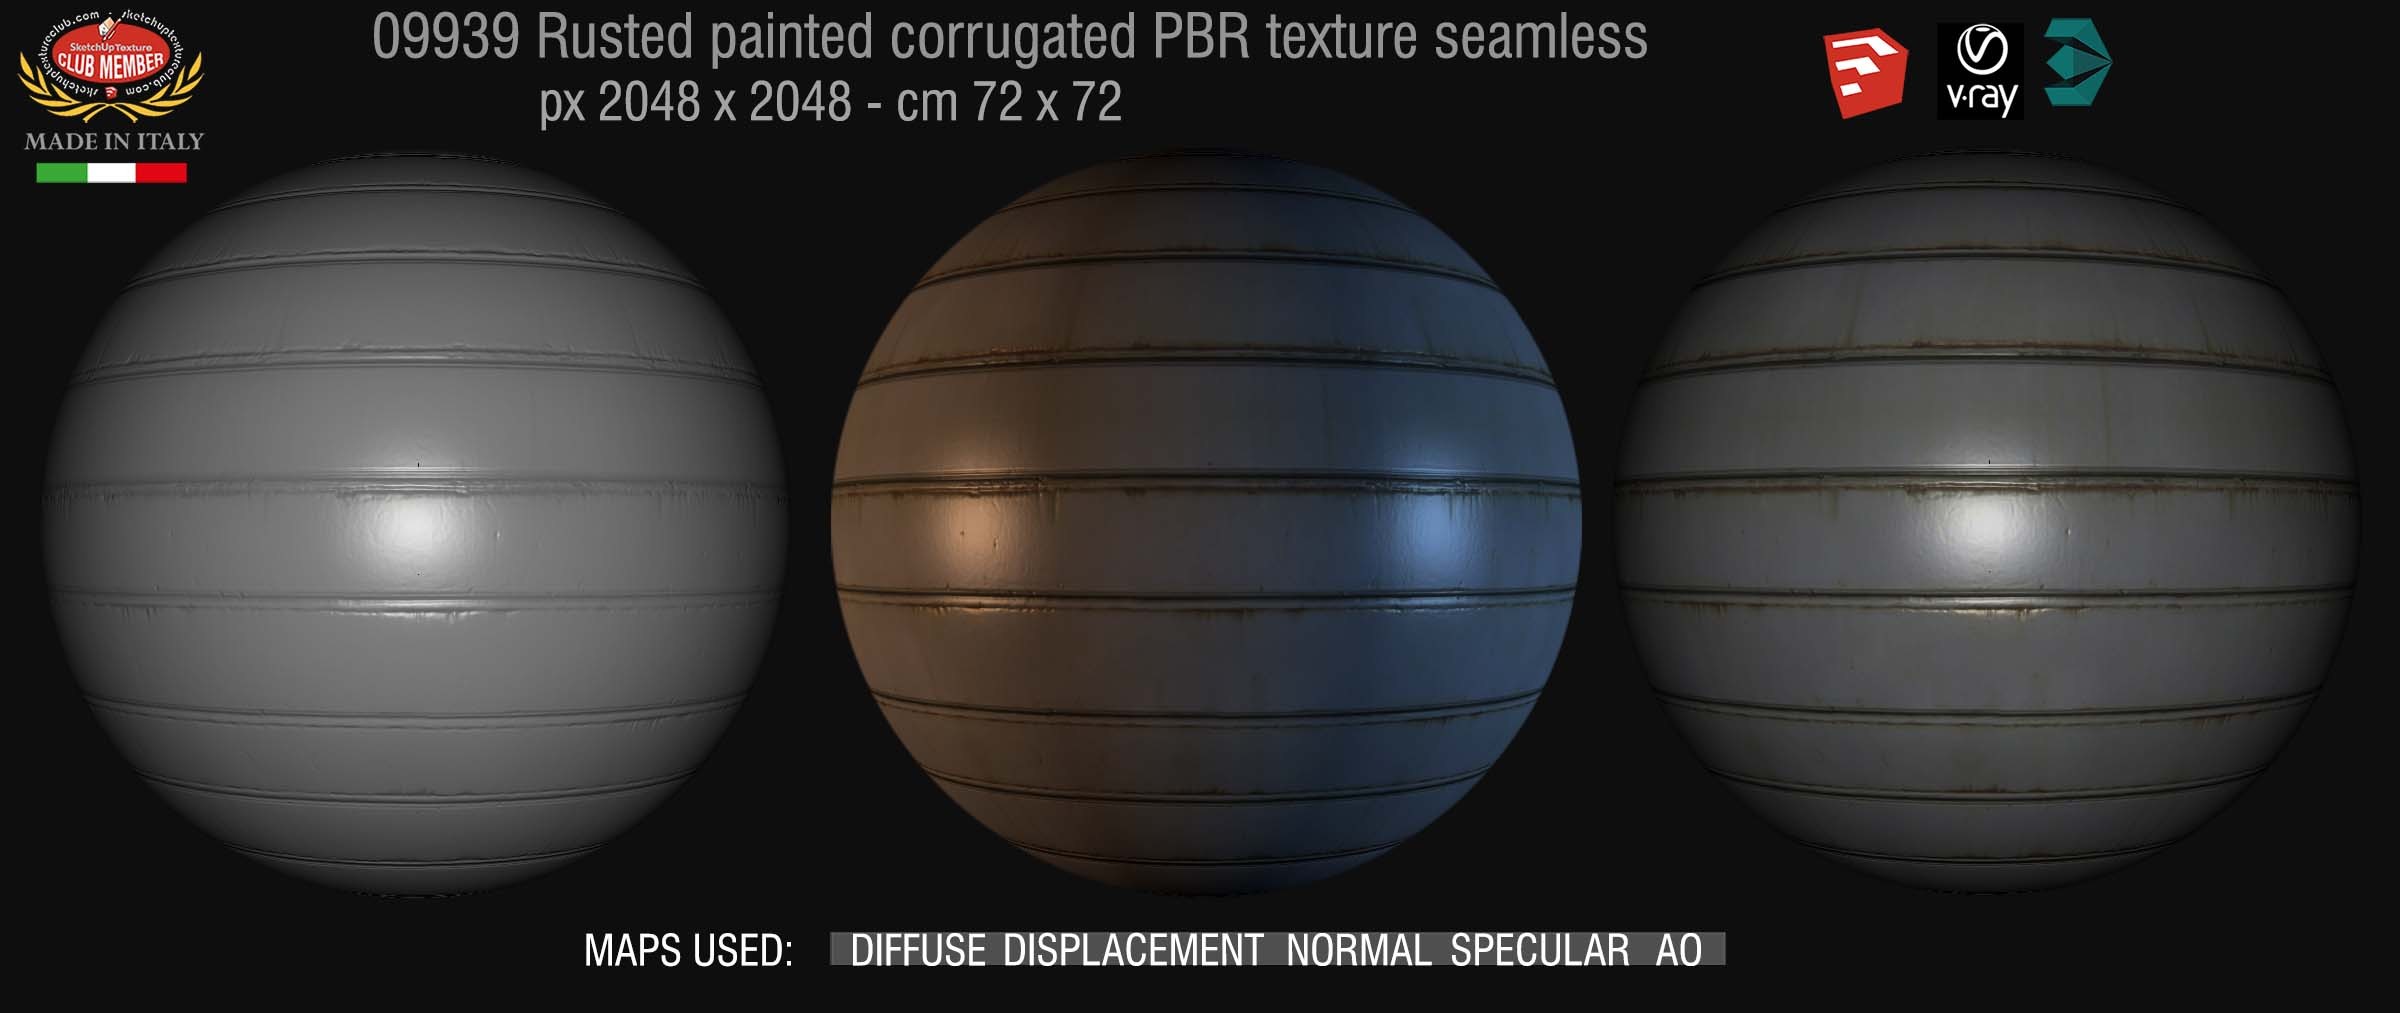 09939 Rusted painted corrugated metal PBR texture seamless DEMO